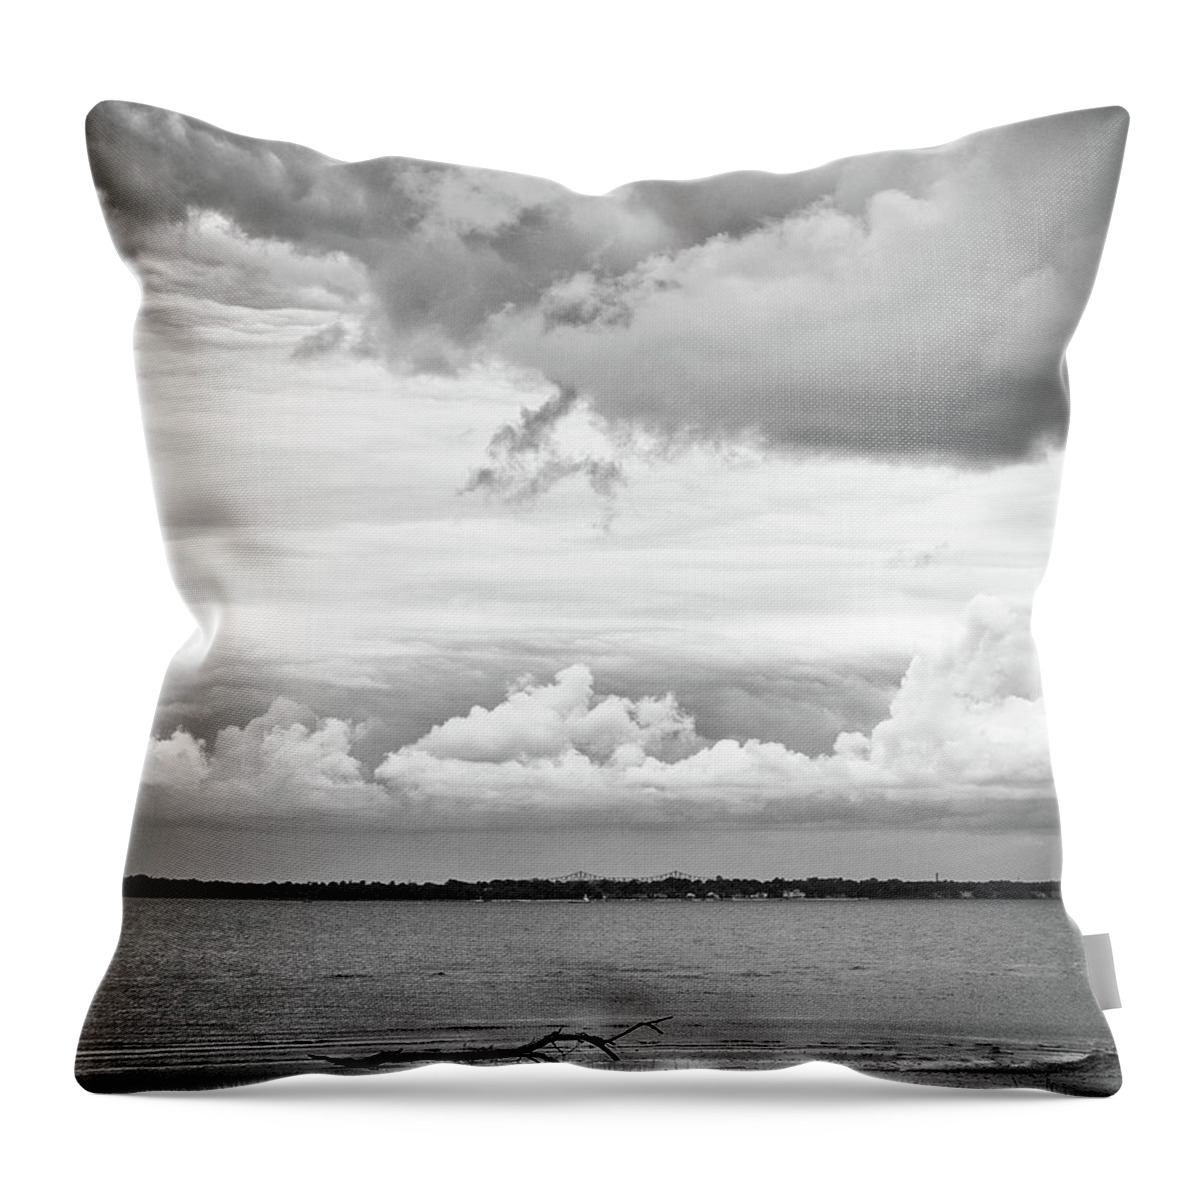  Throw Pillow featuring the photograph By The Bay by Steve Stanger